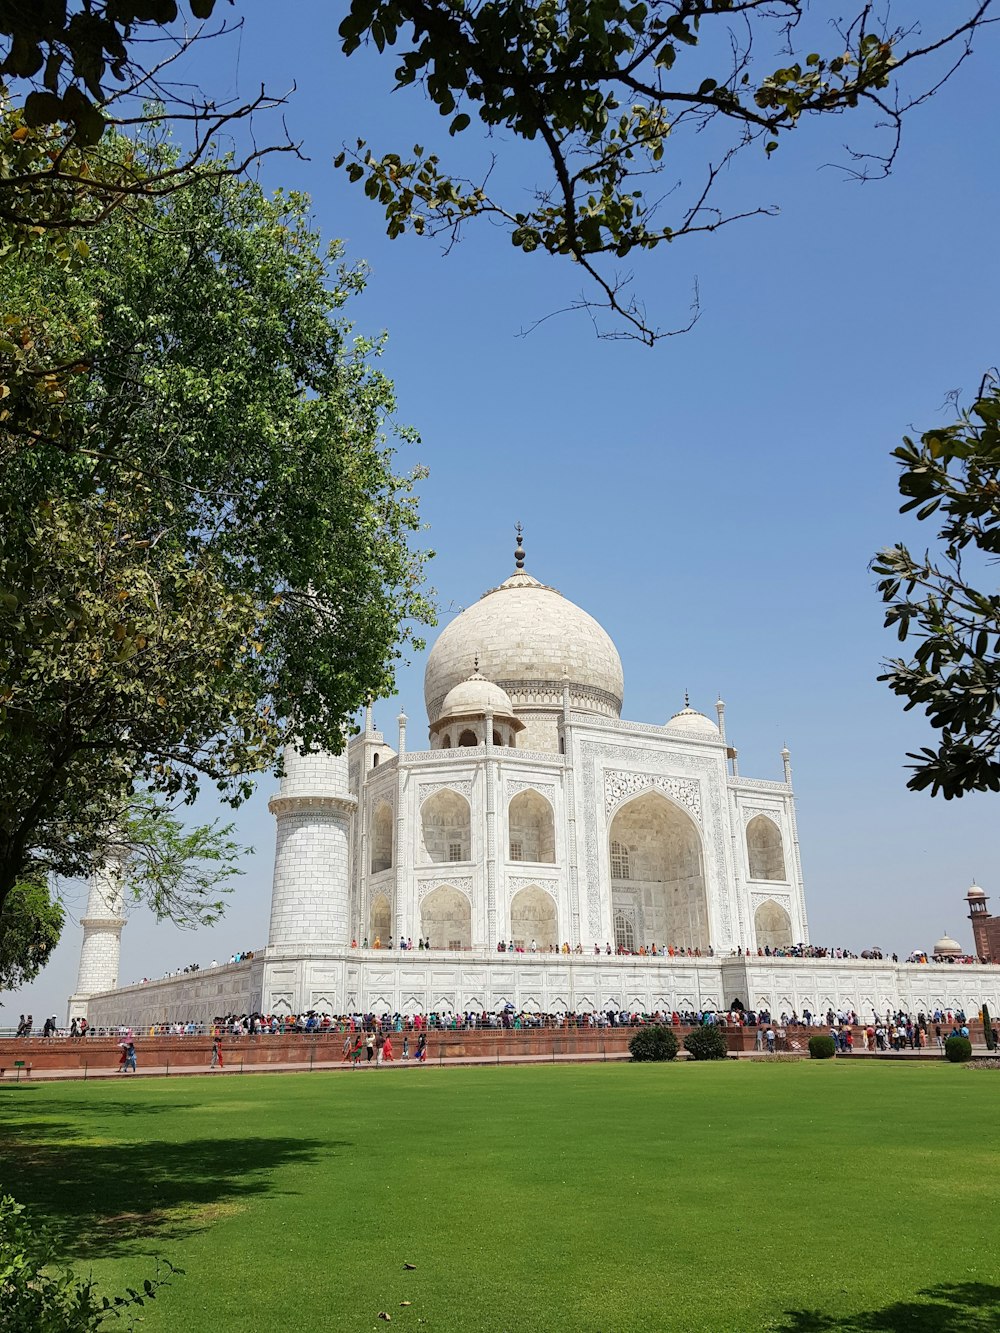 500+ Taj Mahal Agra India Pictures [HD] | Download Free Images on Unsplash